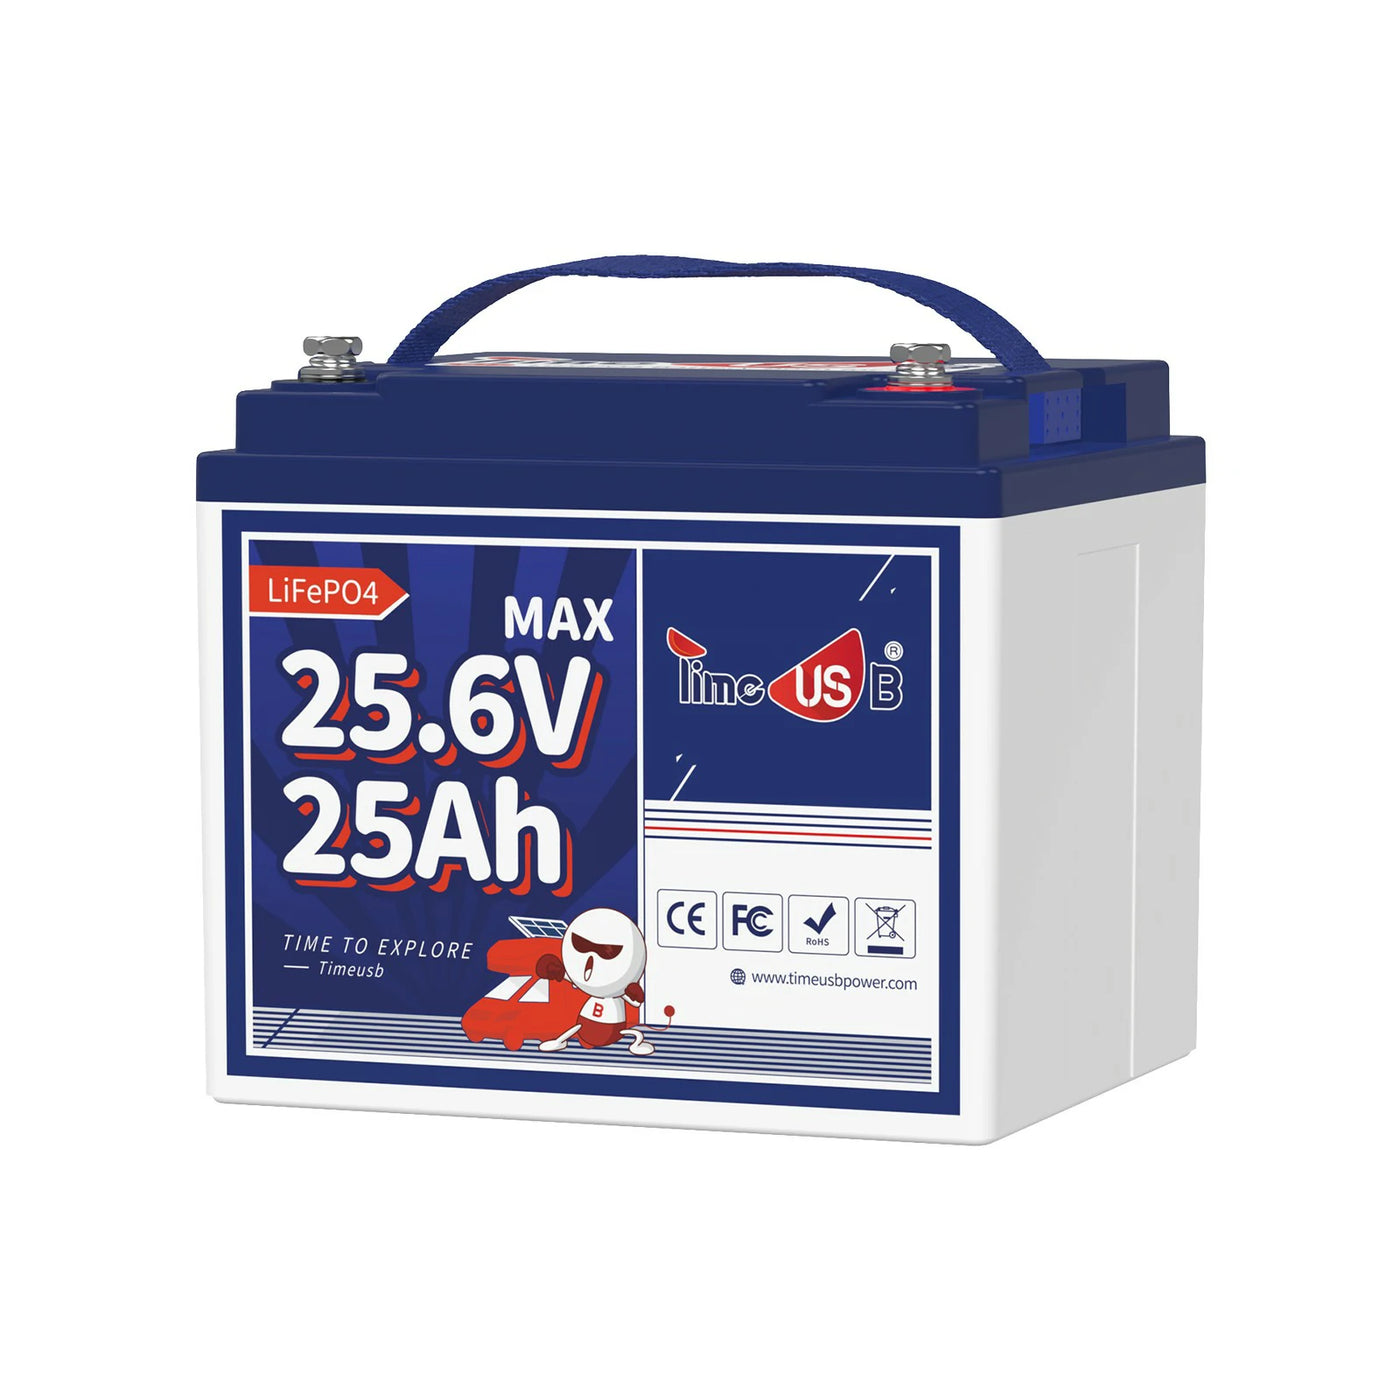 [Final: ＄180.49] Timeusb 24V 25Ah LiFePO4 Battery, 640Wh & 50A BMS